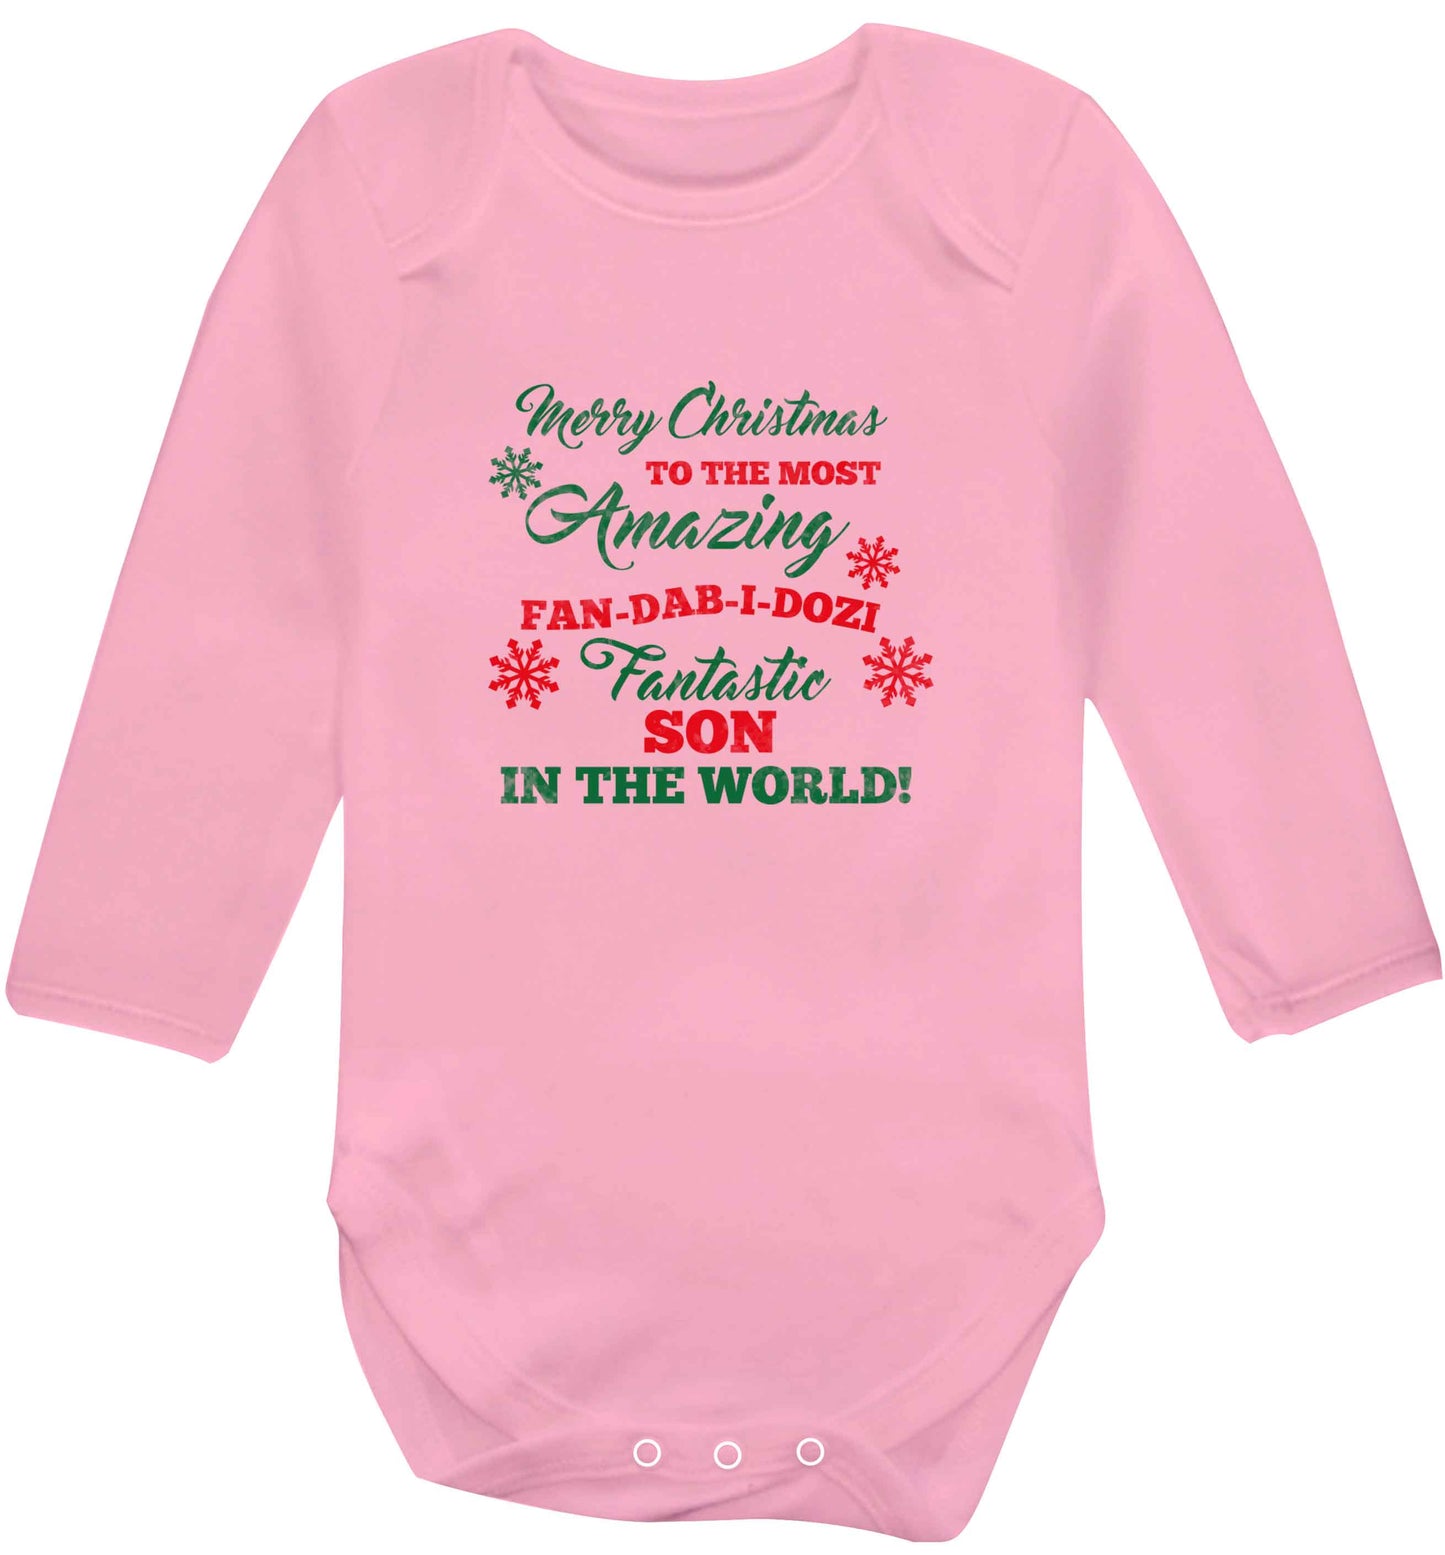 Merry Christmas to the most amazing fan-dab-i-dozi fantasic Son in the world baby vest long sleeved pale pink 6-12 months